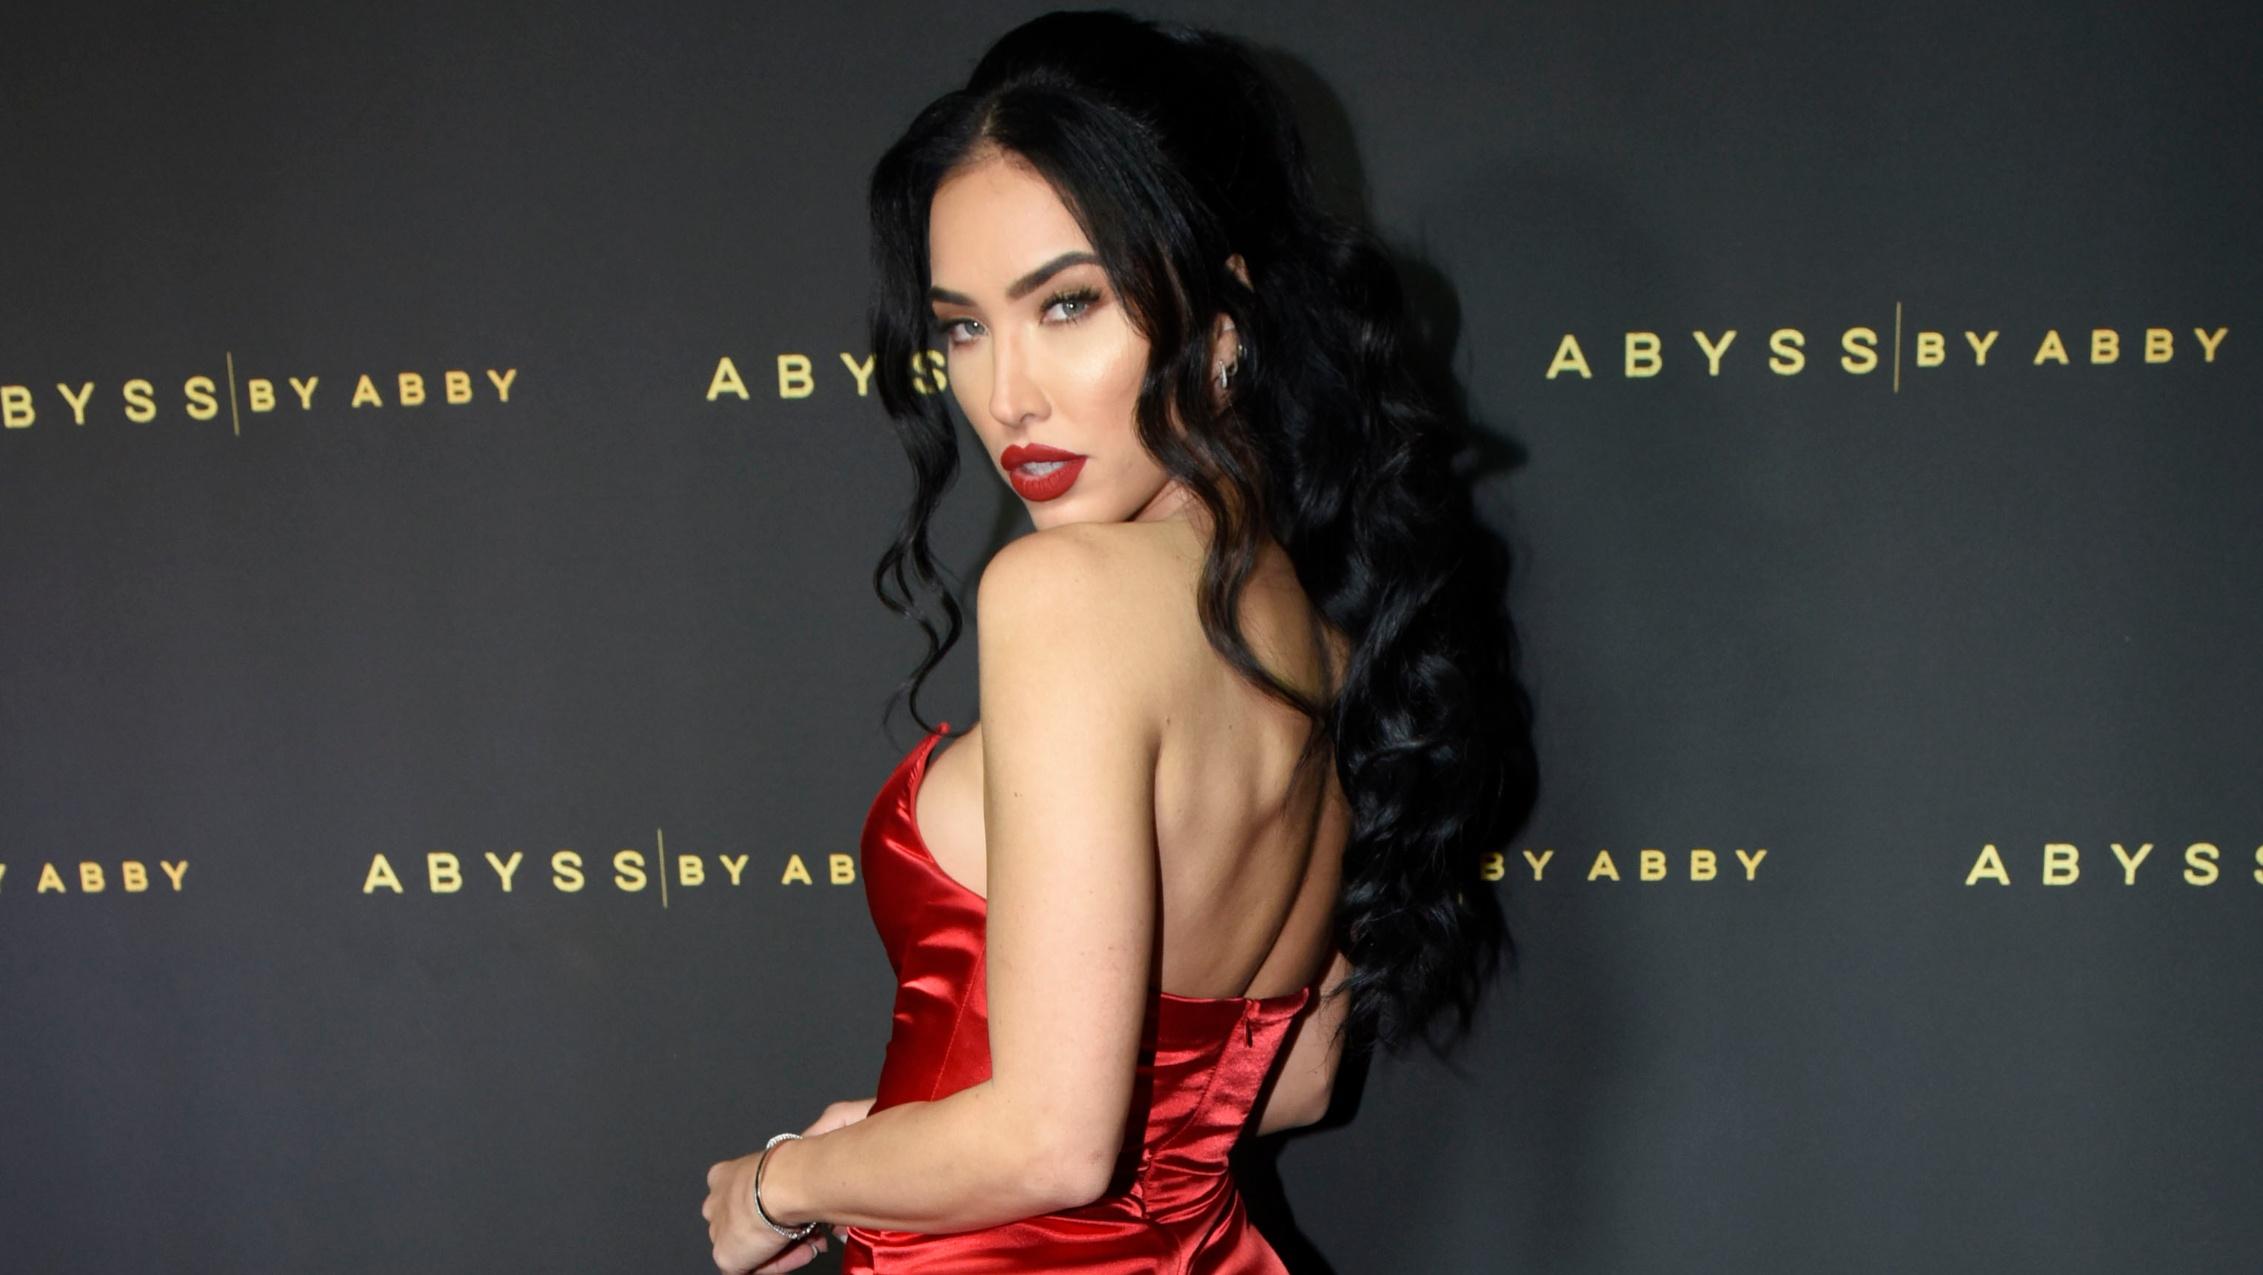 Bre Tiesi attends Abyss By Abby - Arabian Nights Collection Launch Party on Jan. 21, 2020.